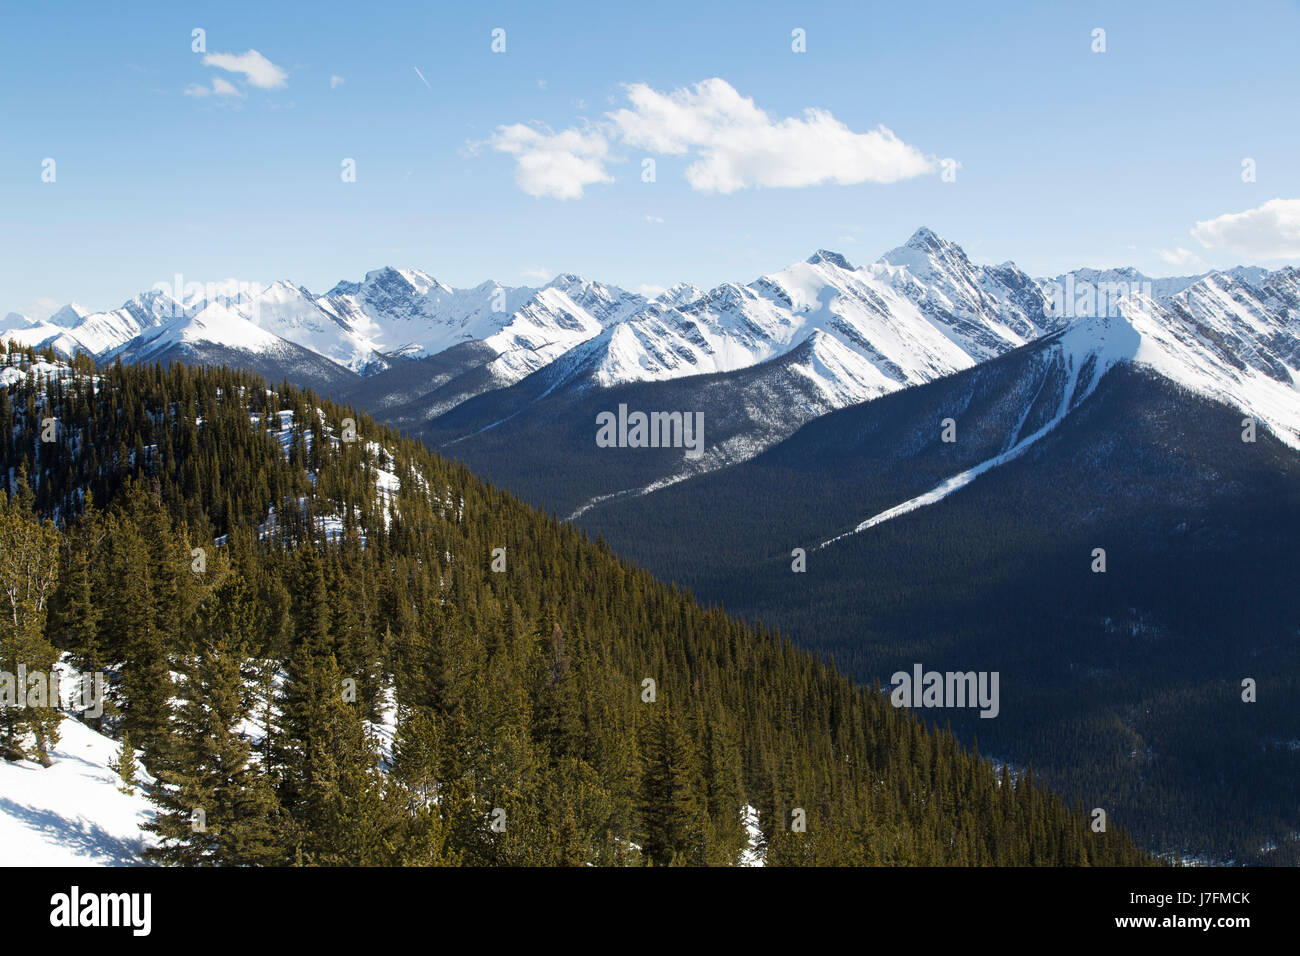 Woodland and snow-capped mountains at Banff National Park in Banff, Alberta, Canada. The national park was established as Canada's first, in 1885. Stock Photo